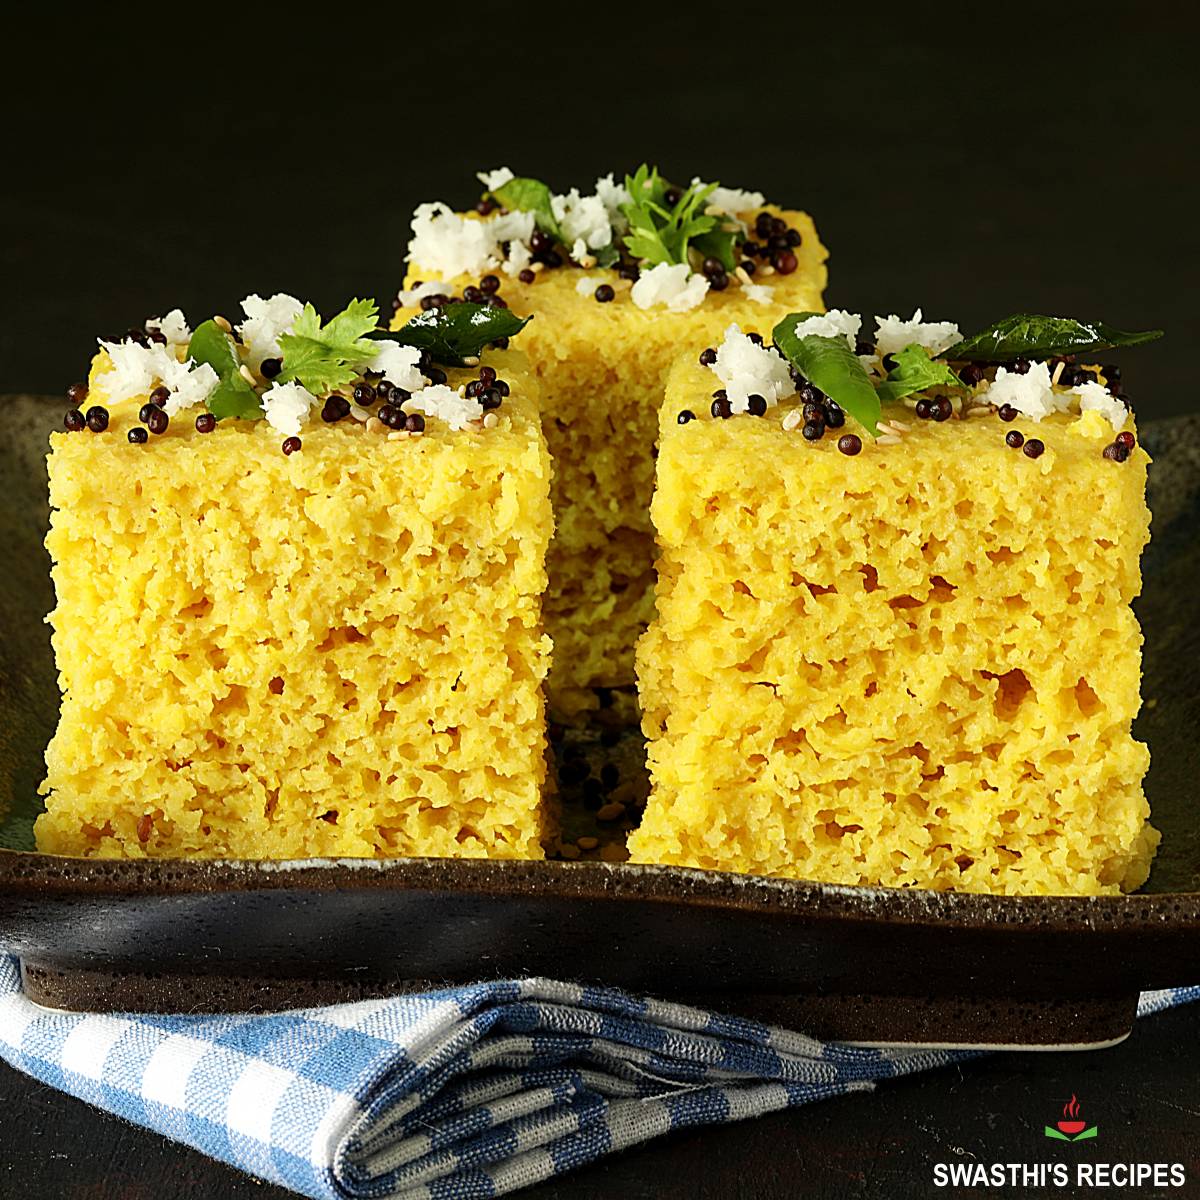 Khaman dhokla recipe made with gram flour yogurt and tempering spices